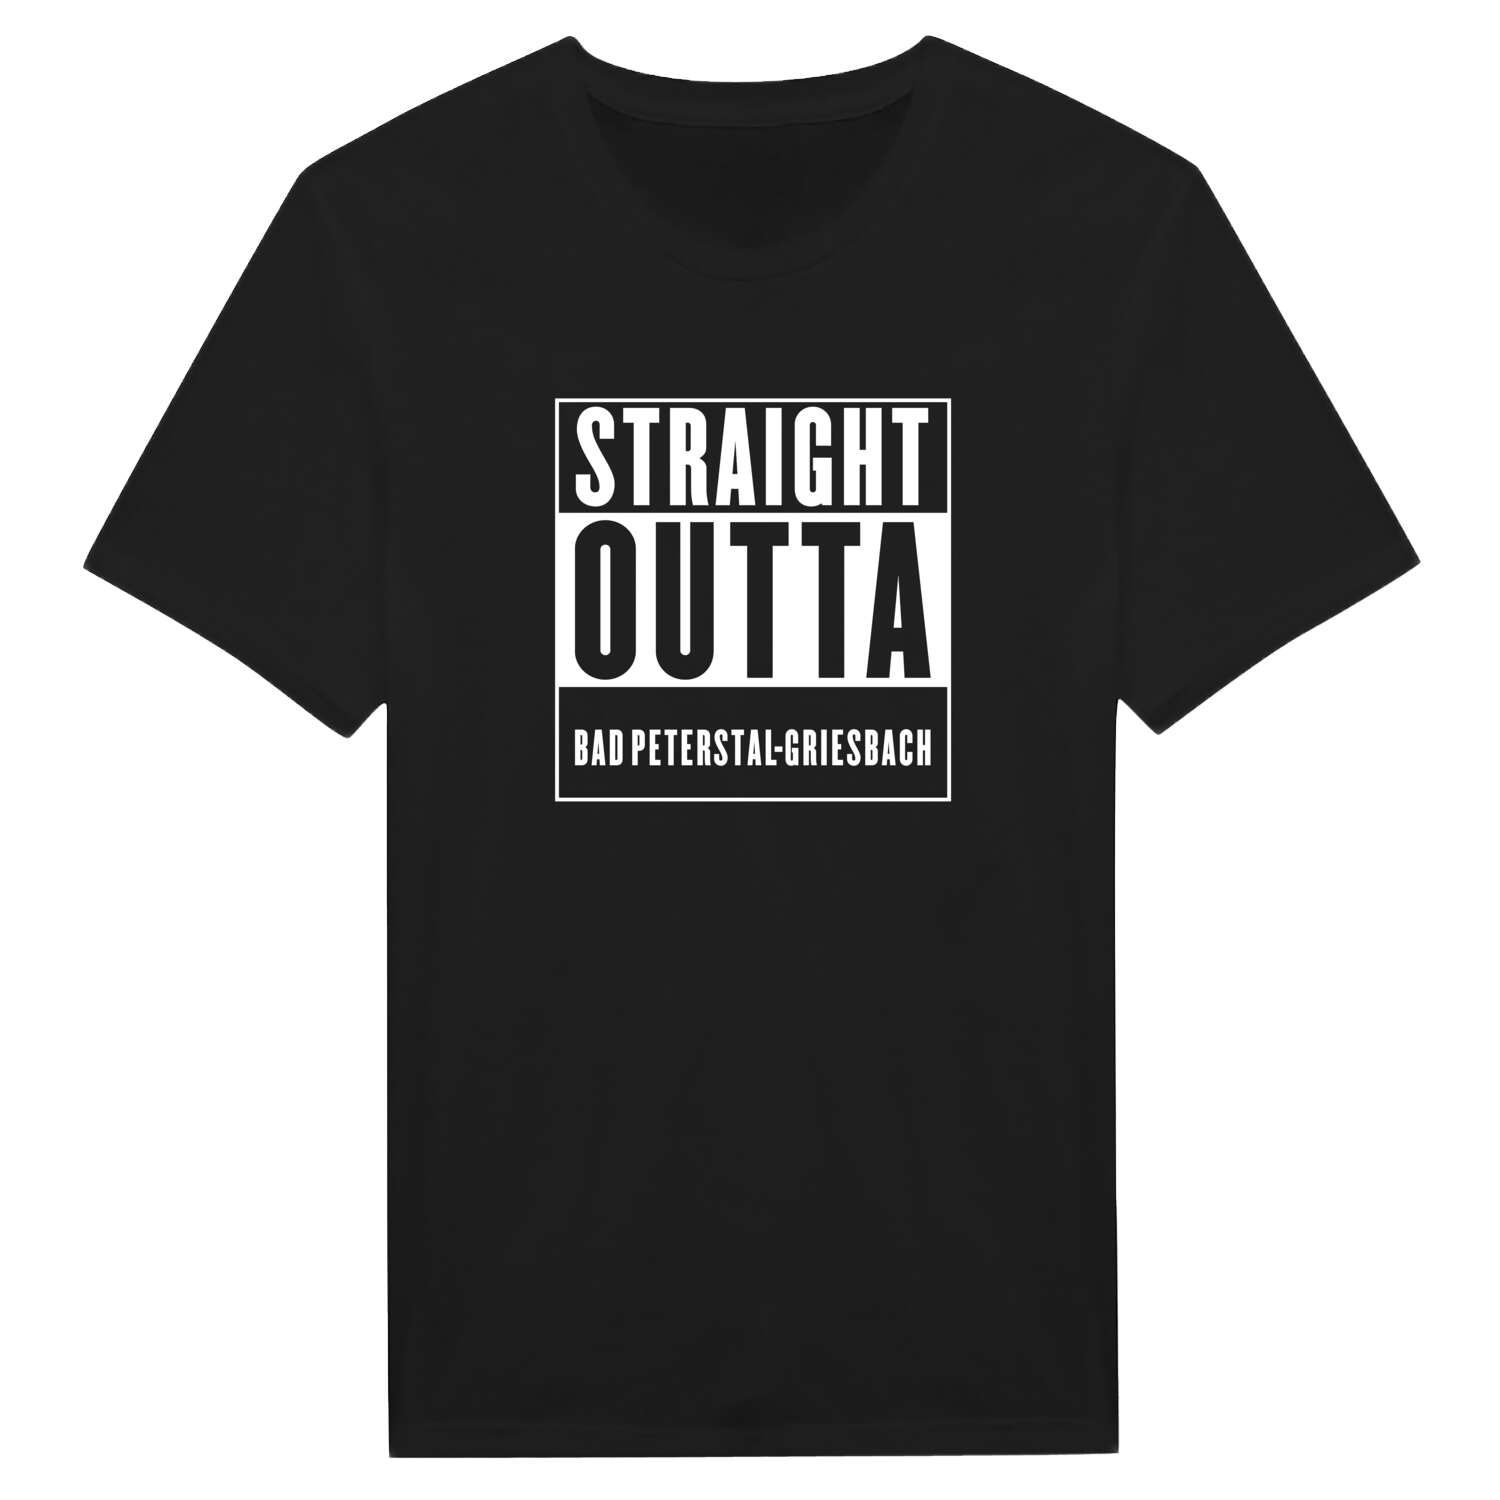 Bad Peterstal-Griesbach T-Shirt »Straight Outta«